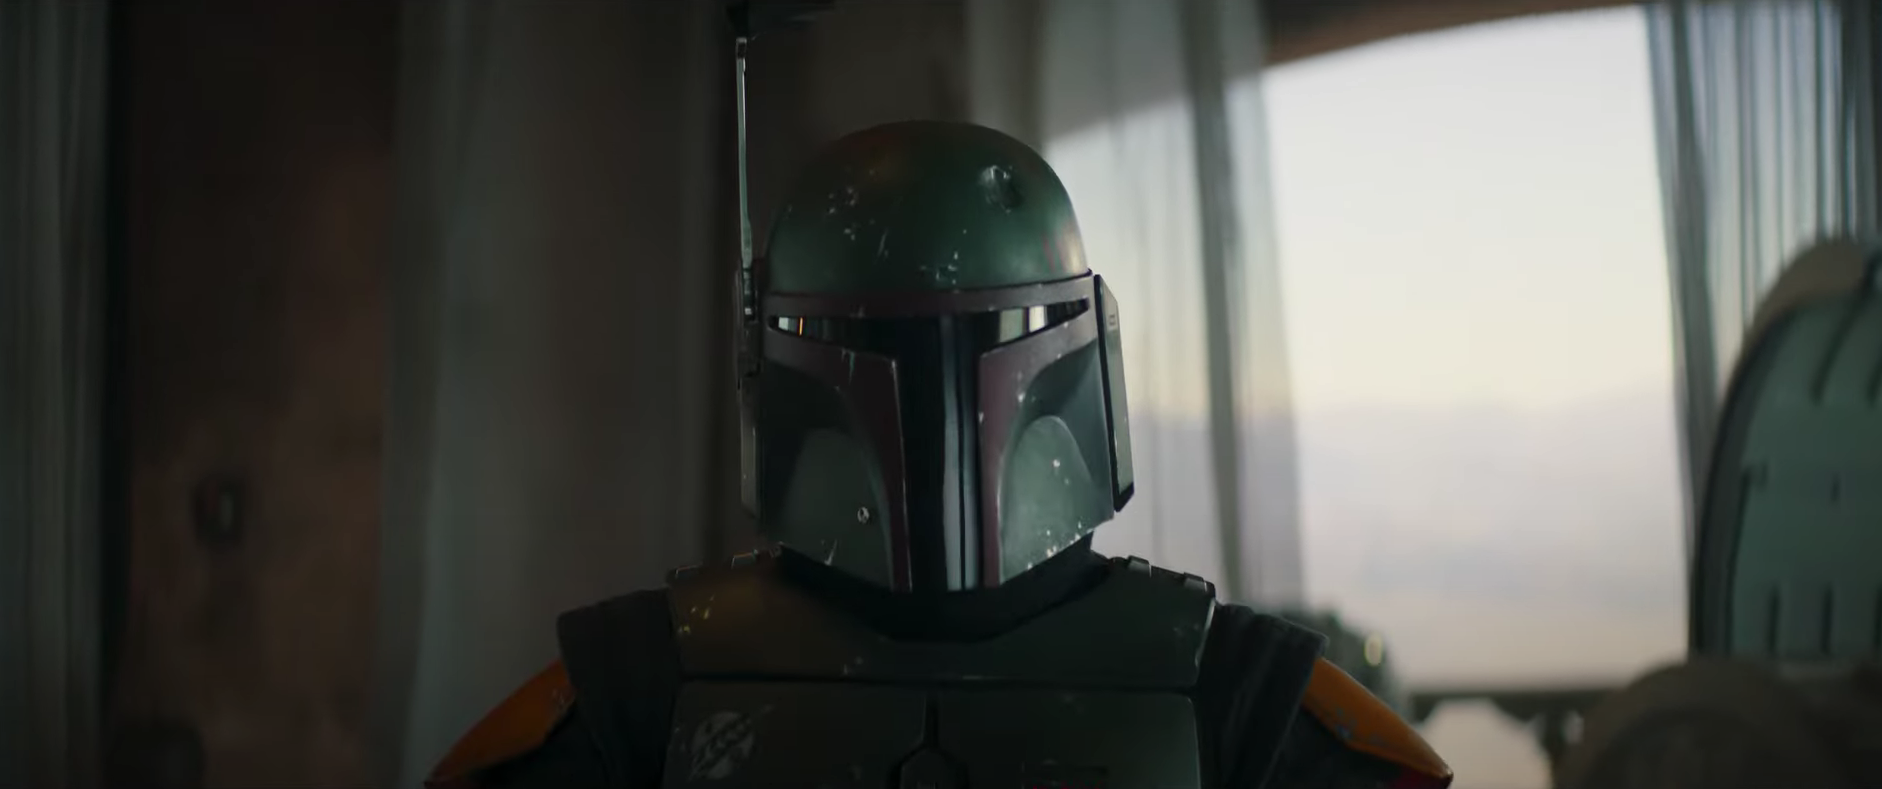 Boba Fett is coming for you